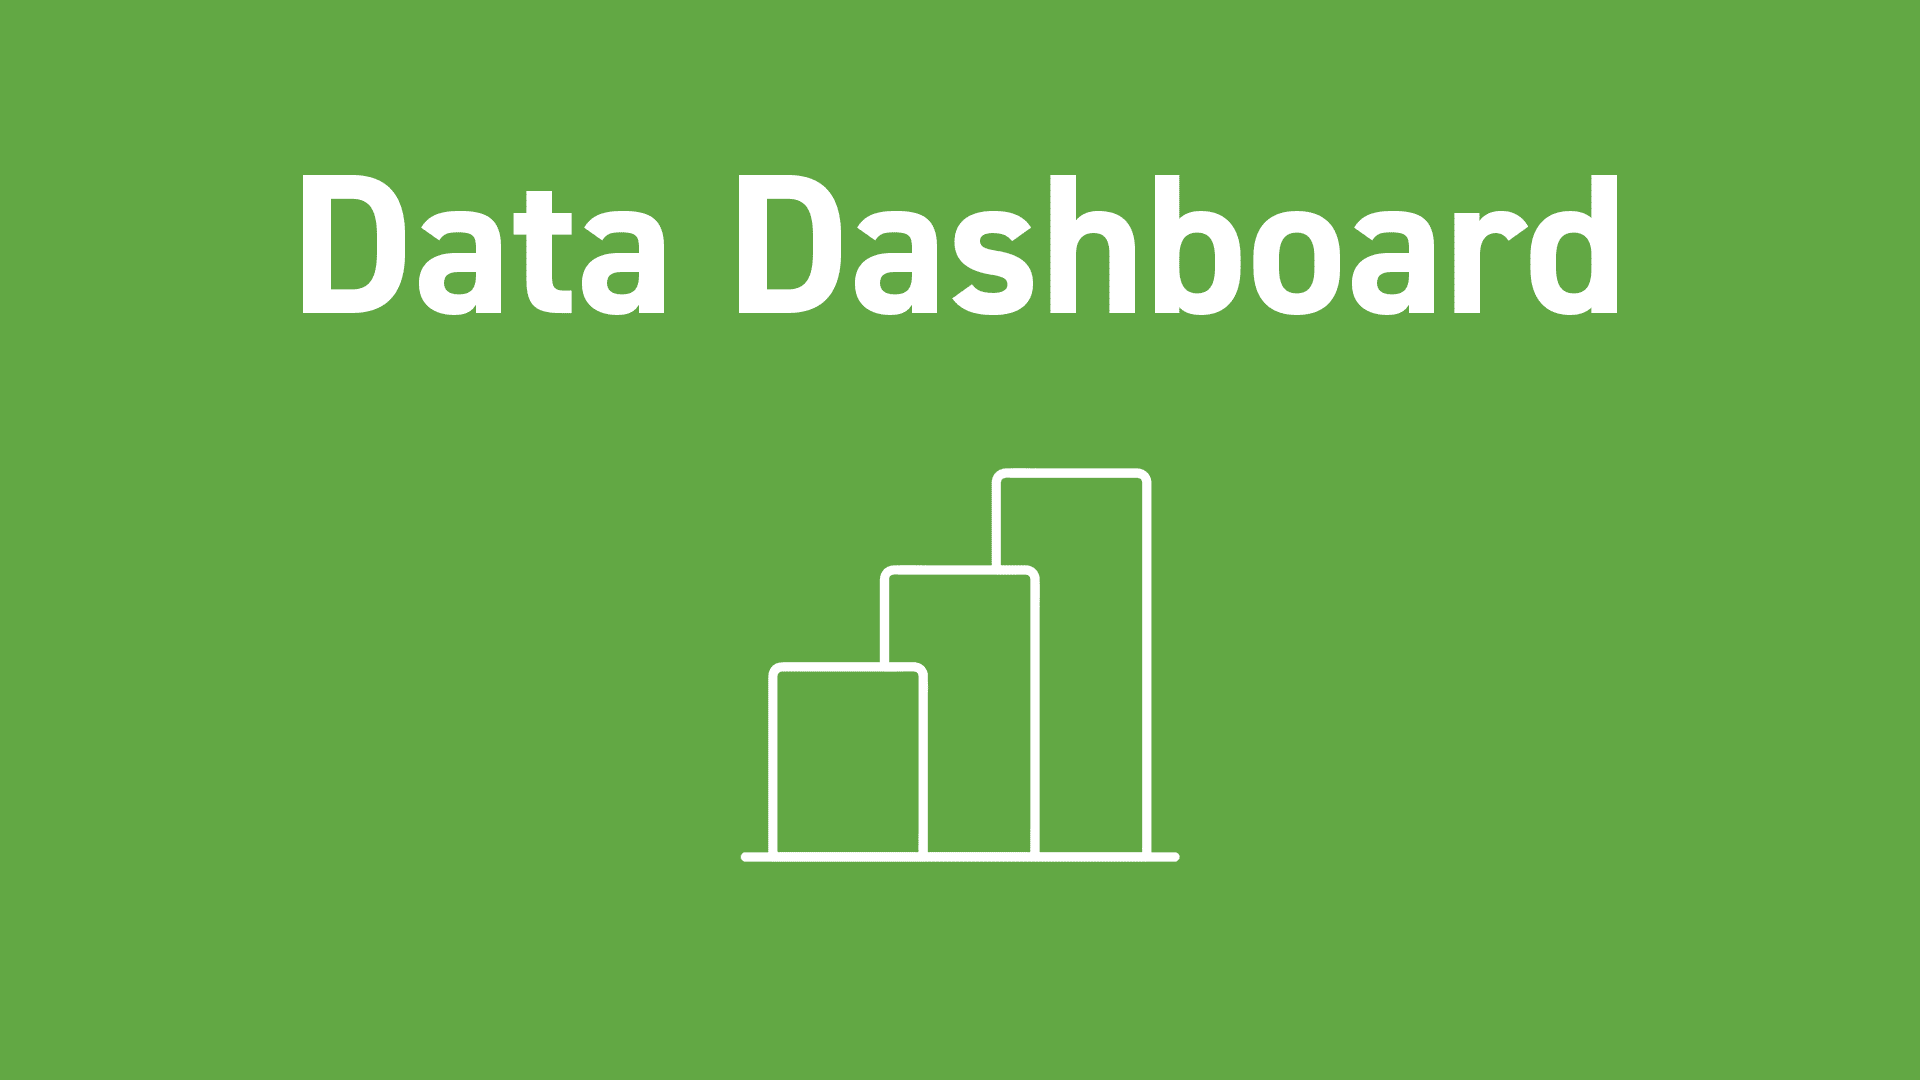 Sign that says "Data Dashboard" with a green background with a line drawing of a bar graph.